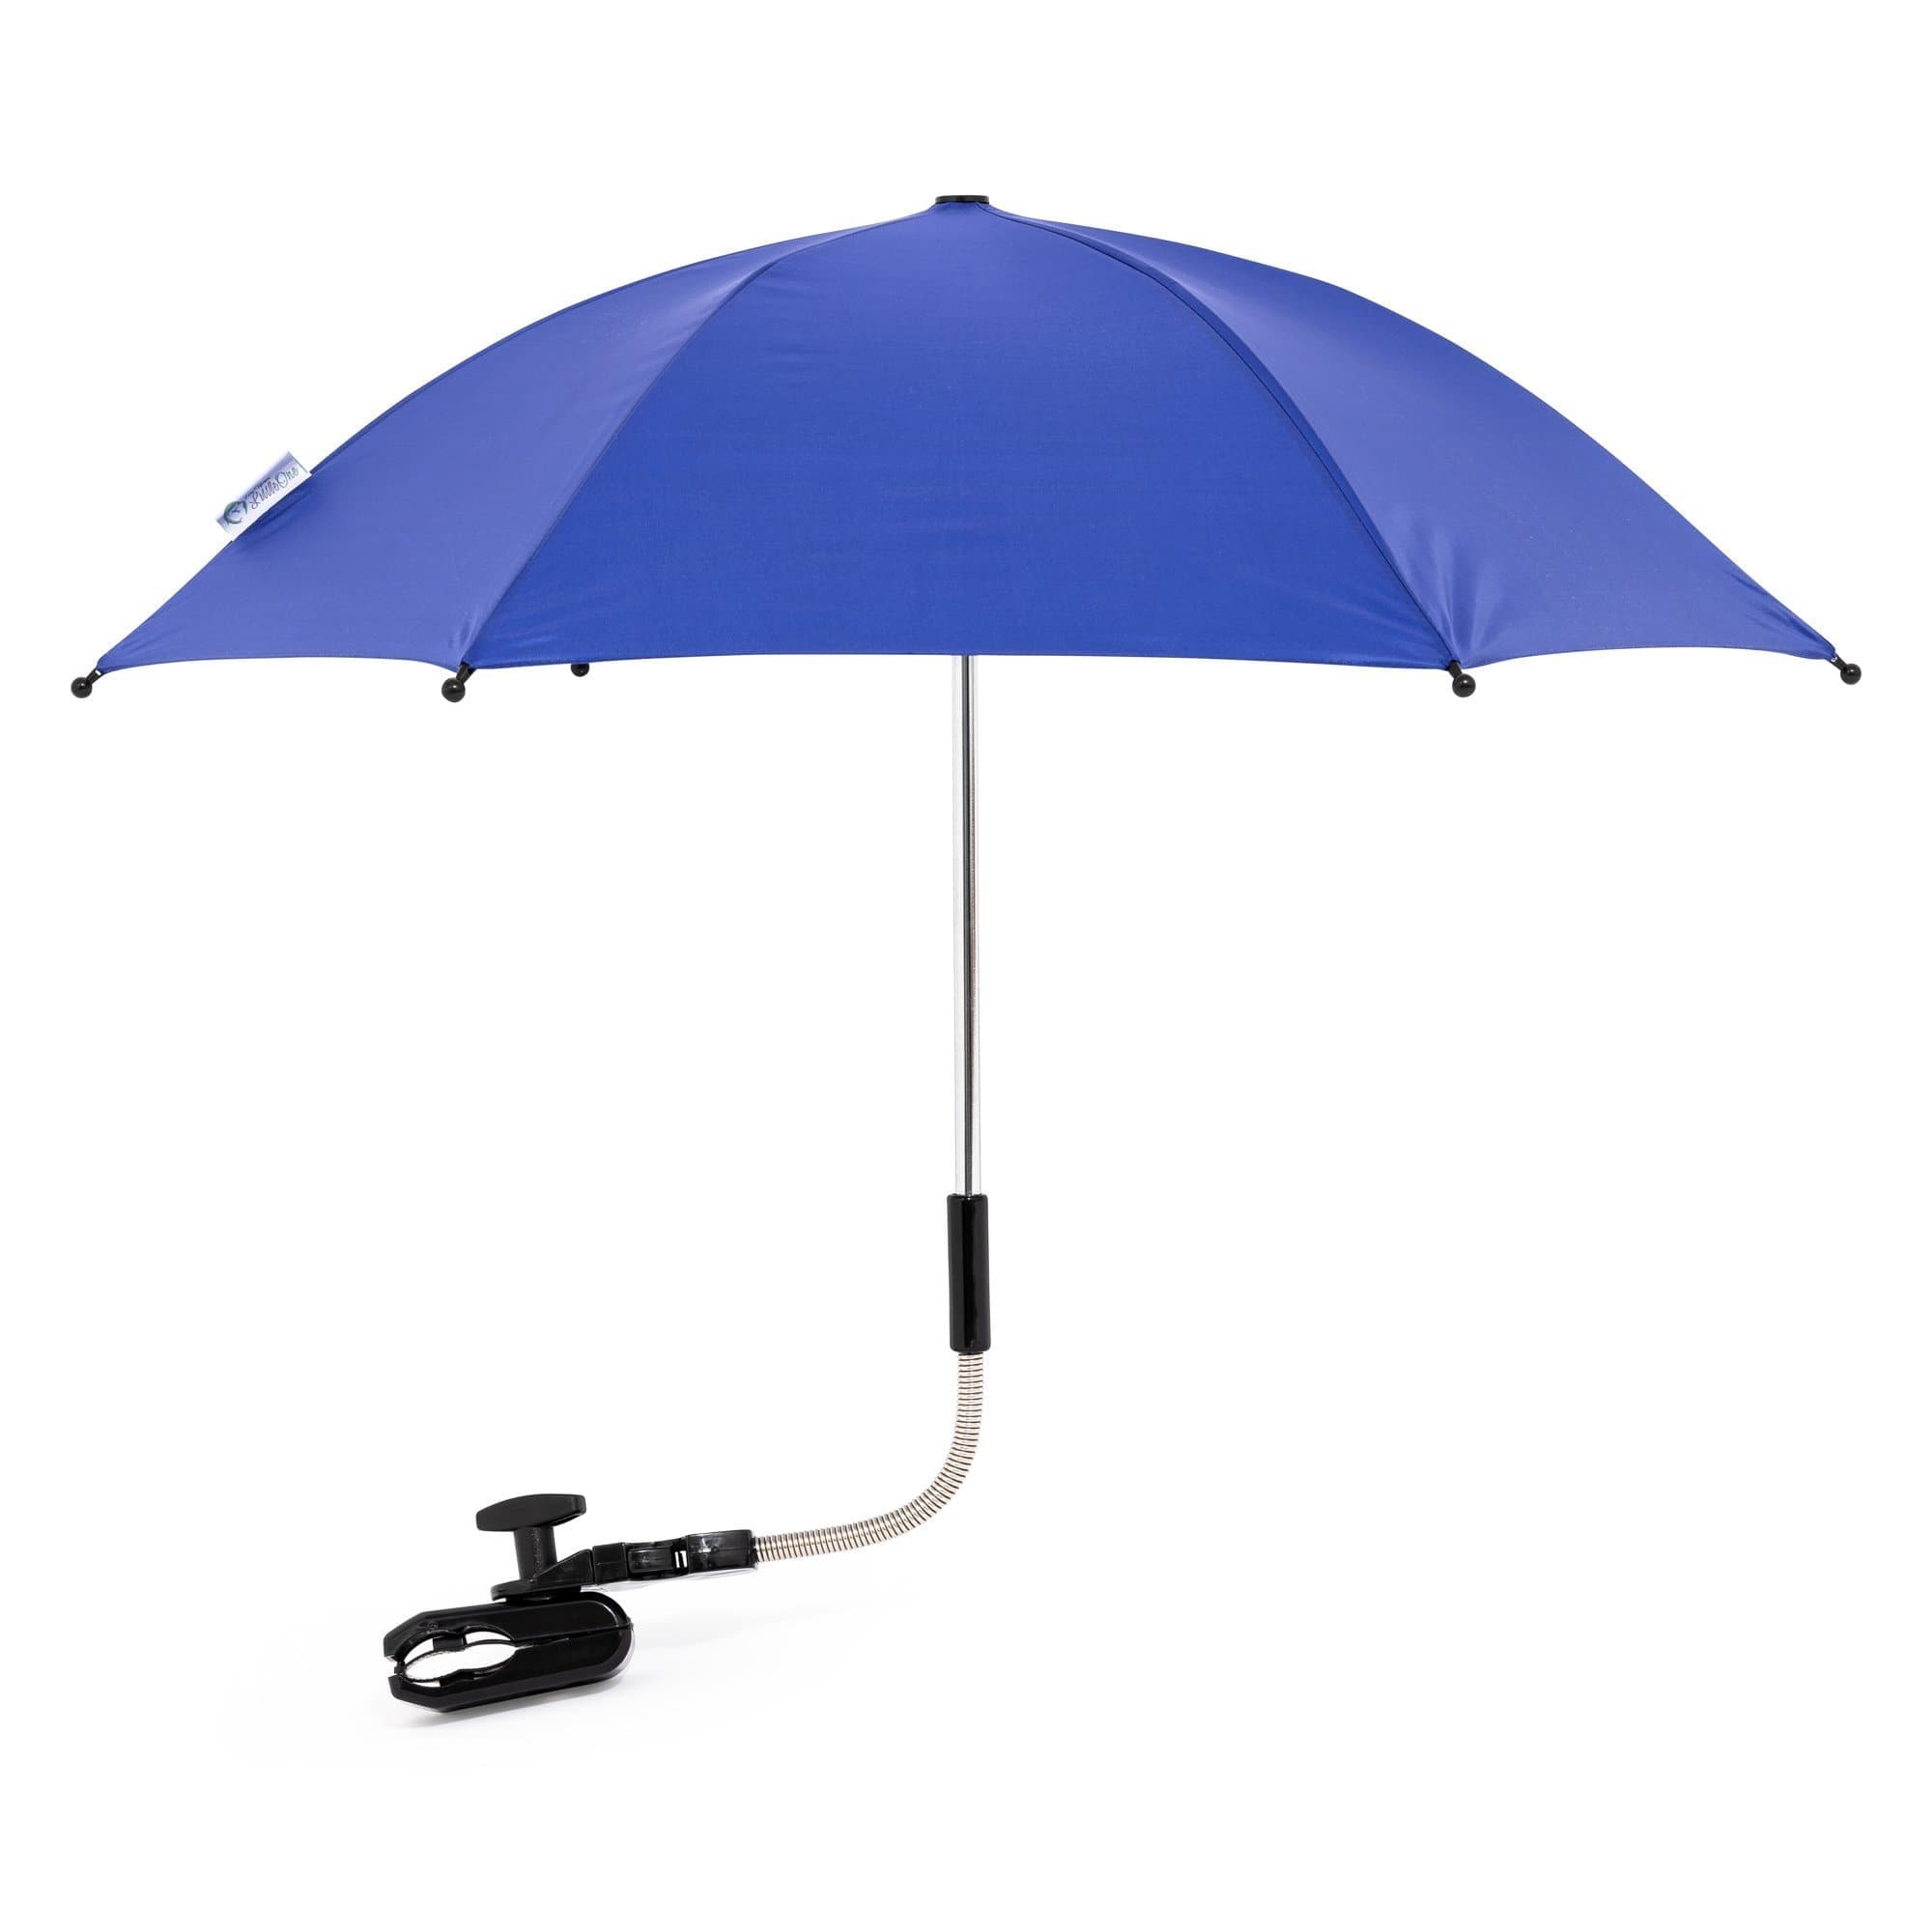 Baby Parasol Compatible With Greentom - Fits All Models - For Your Little One